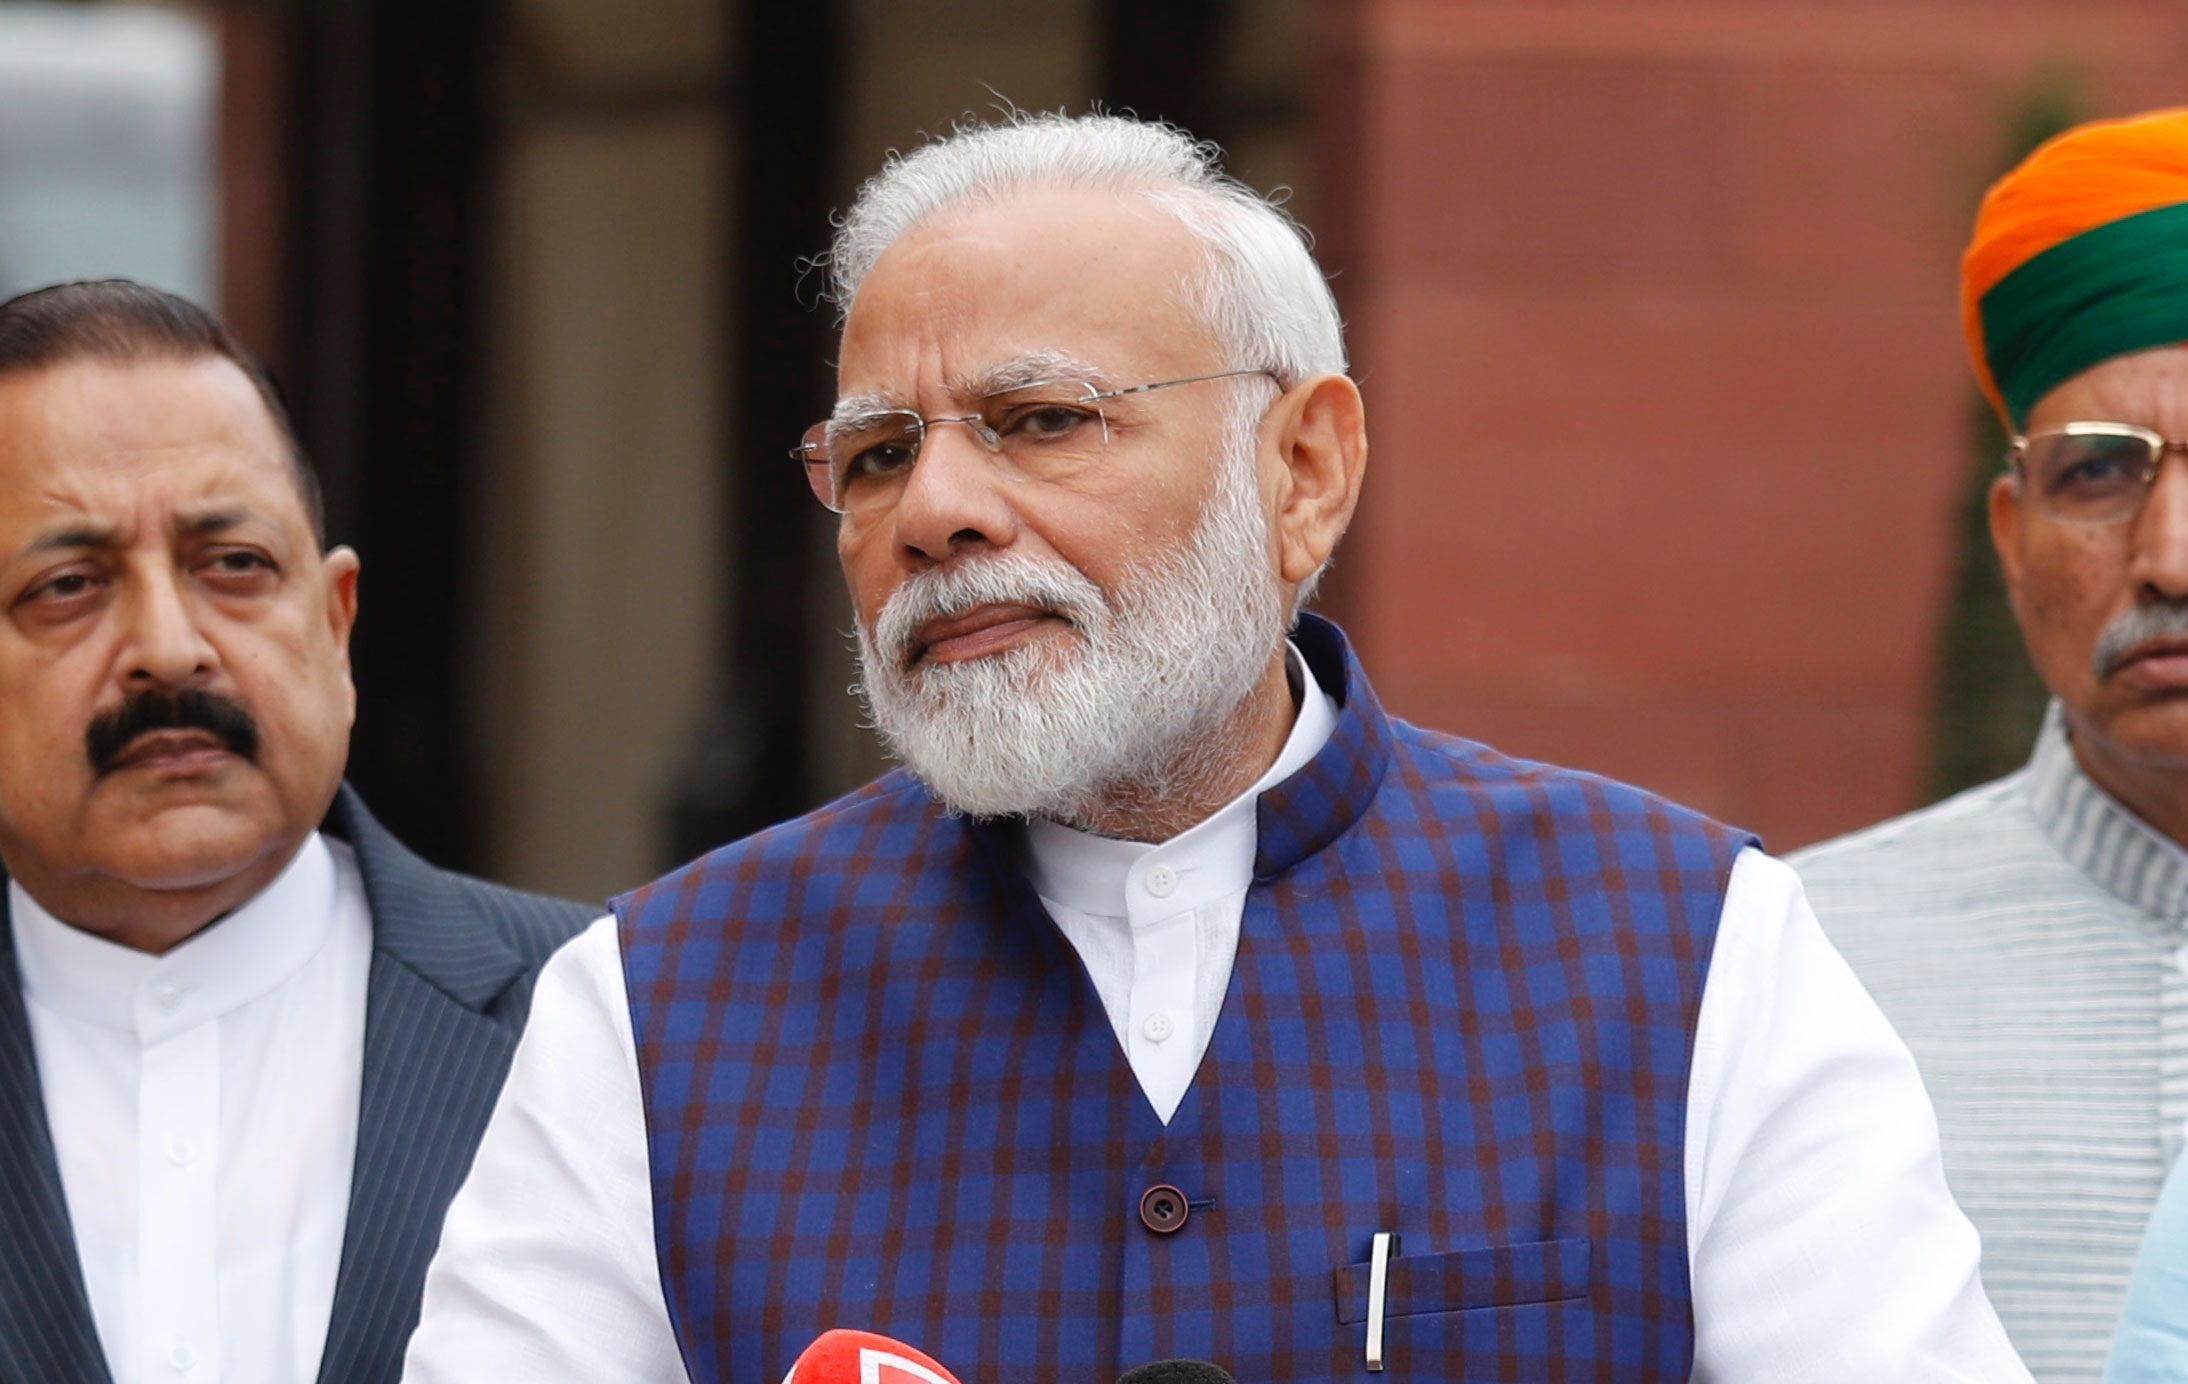 Prime minister Narendra Modi also suggested measures to enhance collaboration in research and development projects among Indians working in different parts of the world